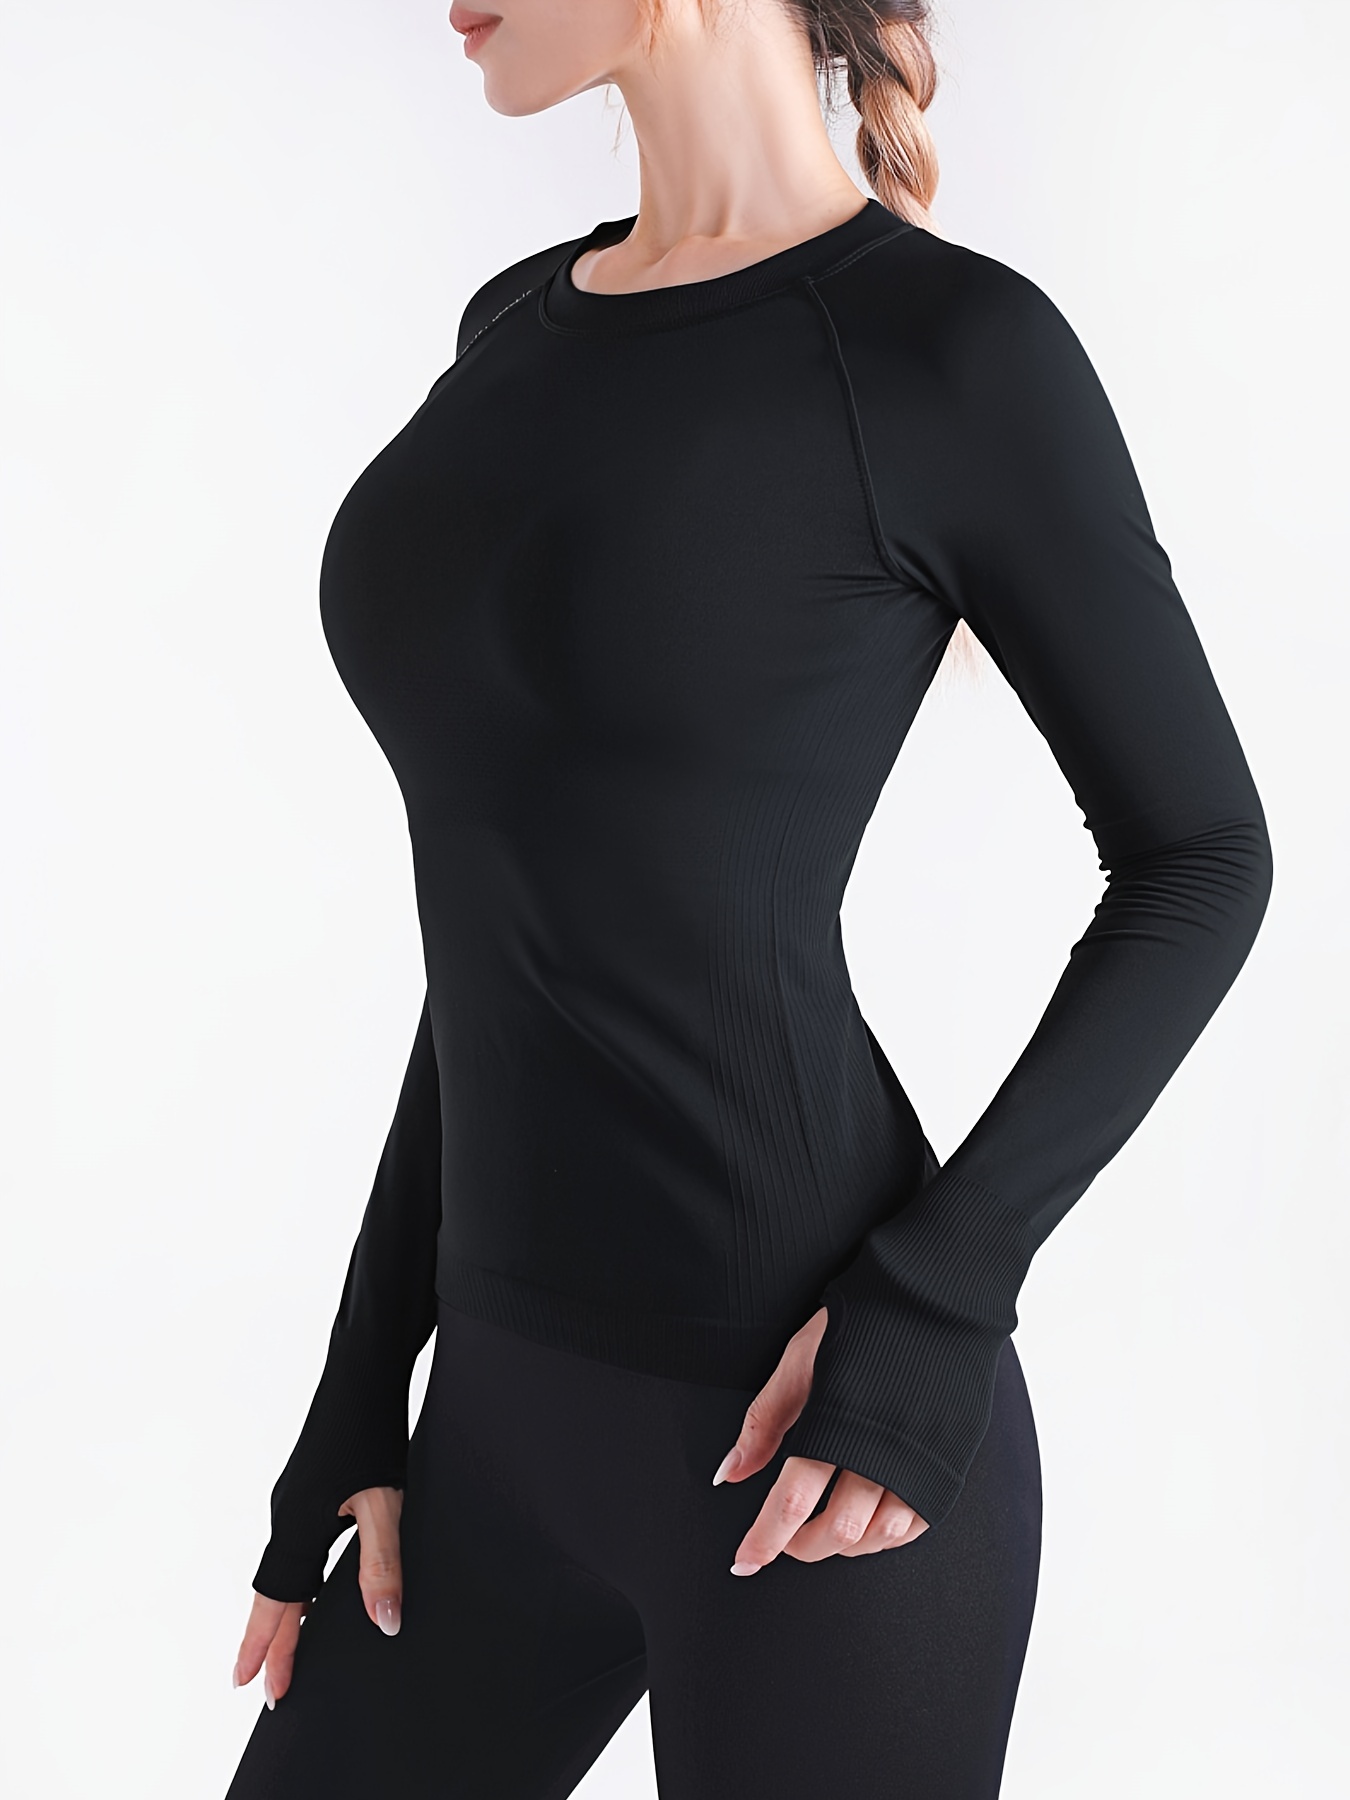 Stown Yoga Tops Women Long Sleeve Asymmetrical Sports and Casual